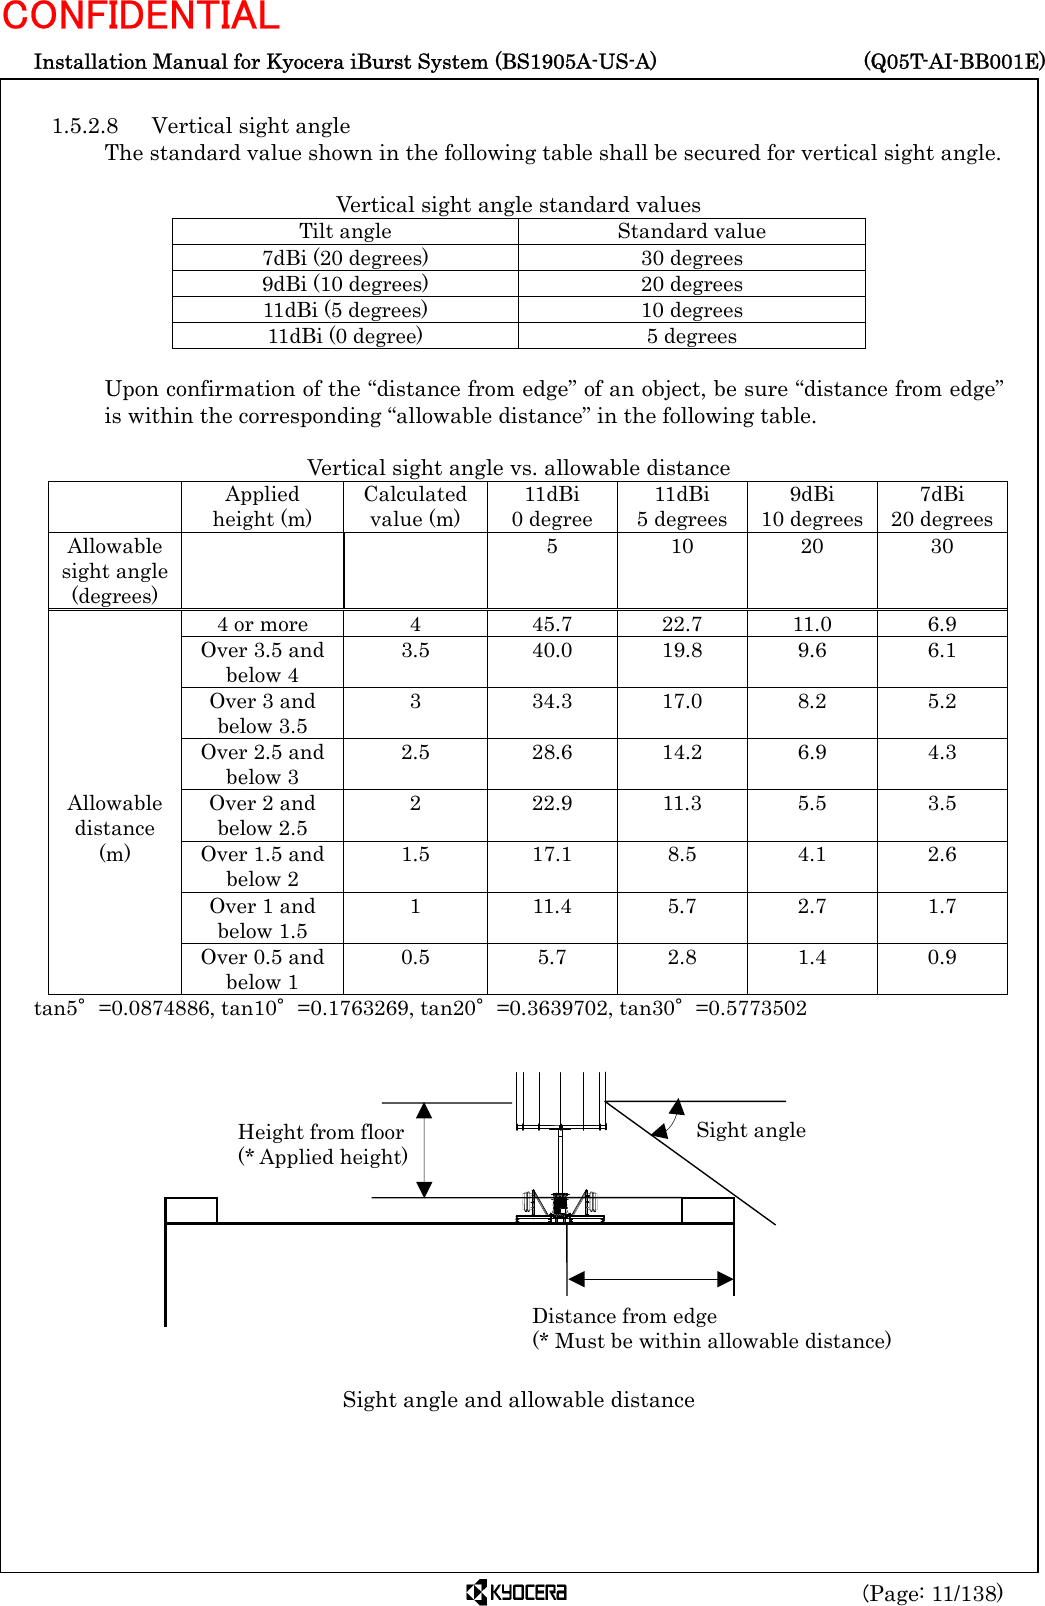  Installation Manual for Kyocera iBurst System (BS1905A-US-A)     (Q05T-AI-BB001E) (Page: 11/138) CONFIDENTIAL  1.5.2.8  Vertical sight angle The standard value shown in the following table shall be secured for vertical sight angle.  Vertical sight angle standard values Tilt angle  Standard value 7dBi (20 degrees)  30 degrees 9dBi (10 degrees)  20 degrees 11dBi (5 degrees)  10 degrees 11dBi (0 degree)  5 degrees  Upon confirmation of the “distance from edge” of an object, be sure “distance from edge” is within the corresponding “allowable distance” in the following table.  Vertical sight angle vs. allowable distance  Applied height (m) Calculated value (m) 11dBi 0 degree 11dBi 5 degrees 9dBi 10 degrees 7dBi 20 degrees Allowable sight angle (degrees)     5  10 20 30   4 or more  4  45.7  22.7  11.0  6.9   Over 3.5 and below 4 3.5 40.0 19.8 9.6 6.1   Over 3 and below 3.5 3 34.3 17.0 8.2 5.2   Over 2.5 and below 3 2.5 28.6 14.2 6.9 4.3 Allowable distance Over 2 and below 2.5 2 22.9 11.3 5.5 3.5 (m)  Over 1.5 and below 2 1.5 17.1 8.5 4.1 2.6   Over 1 and below 1.5 1  11.4 5.7 2.7 1.7   Over 0.5 and below 1 0.5  5.7 2.8 1.4 0.9 tan5°=0.0874886, tan10°=0.1763269, tan20°=0.3639702, tan30°=0.5773502            Sight angle and allowable distance Sight angle Height from floor (* Applied height) Distance from edge (* Must be within allowable distance) 